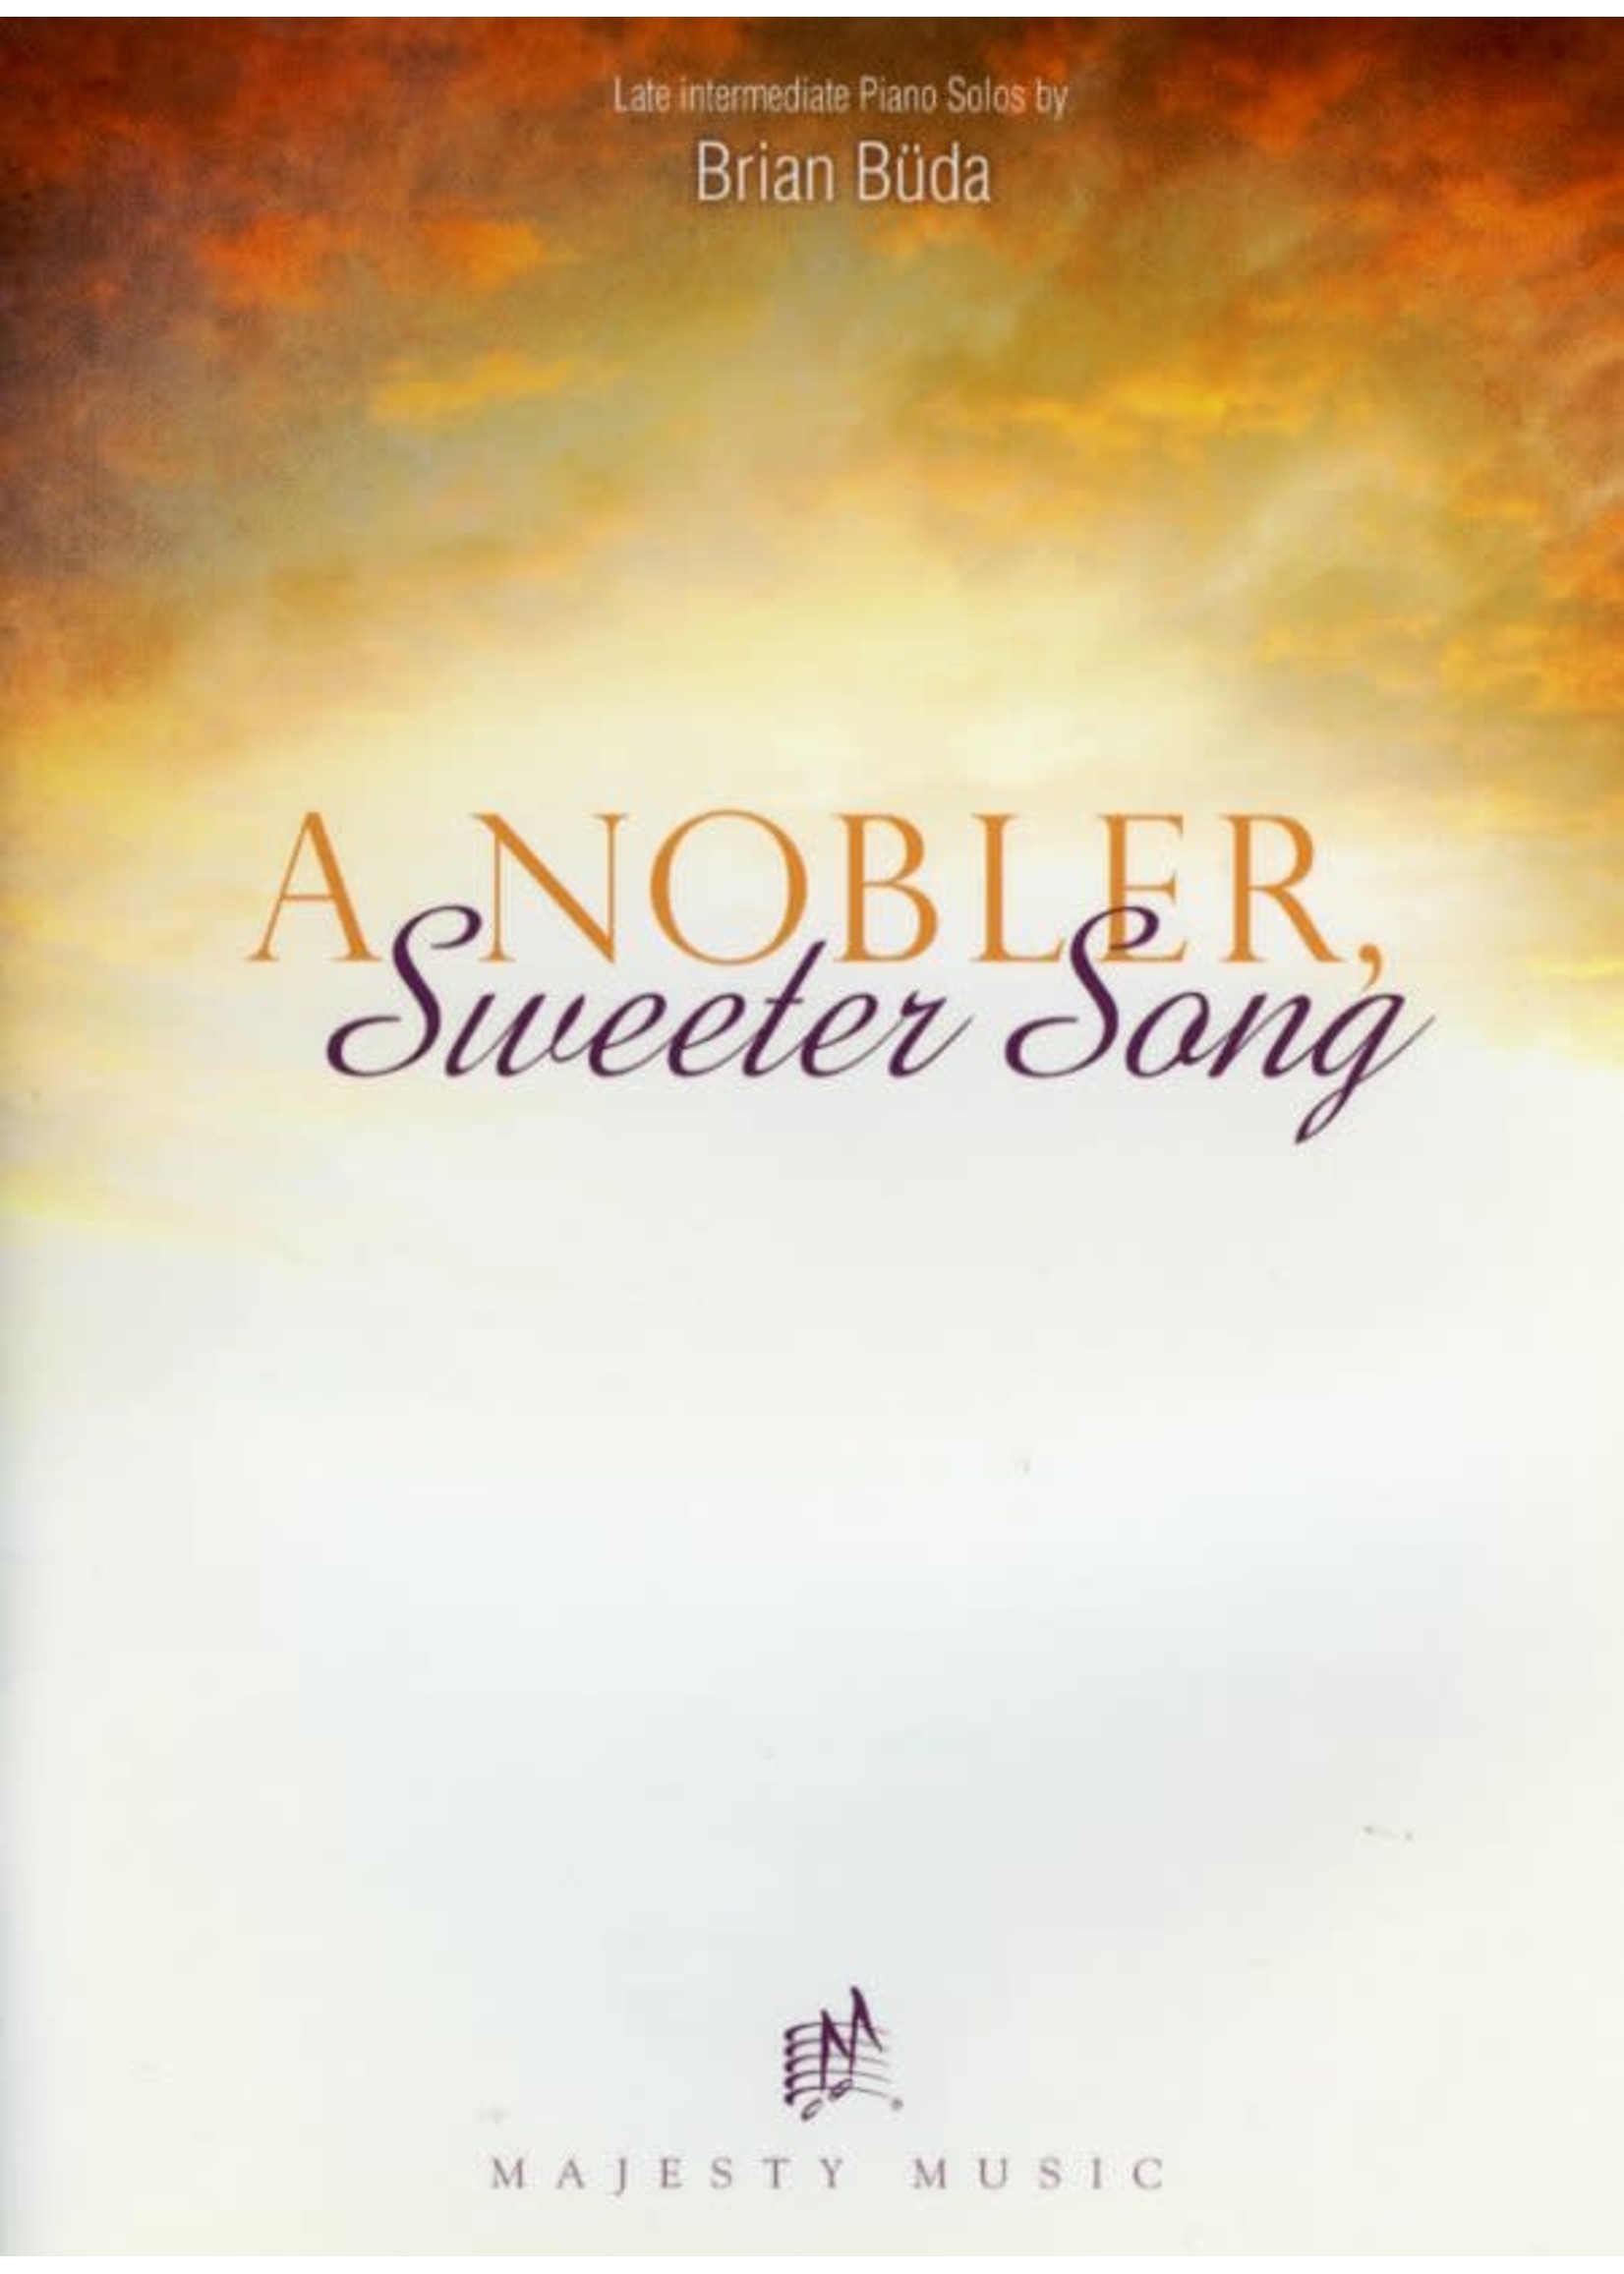 A Nobler Sweeter Song (Intermediate Piano Solos/Buda)